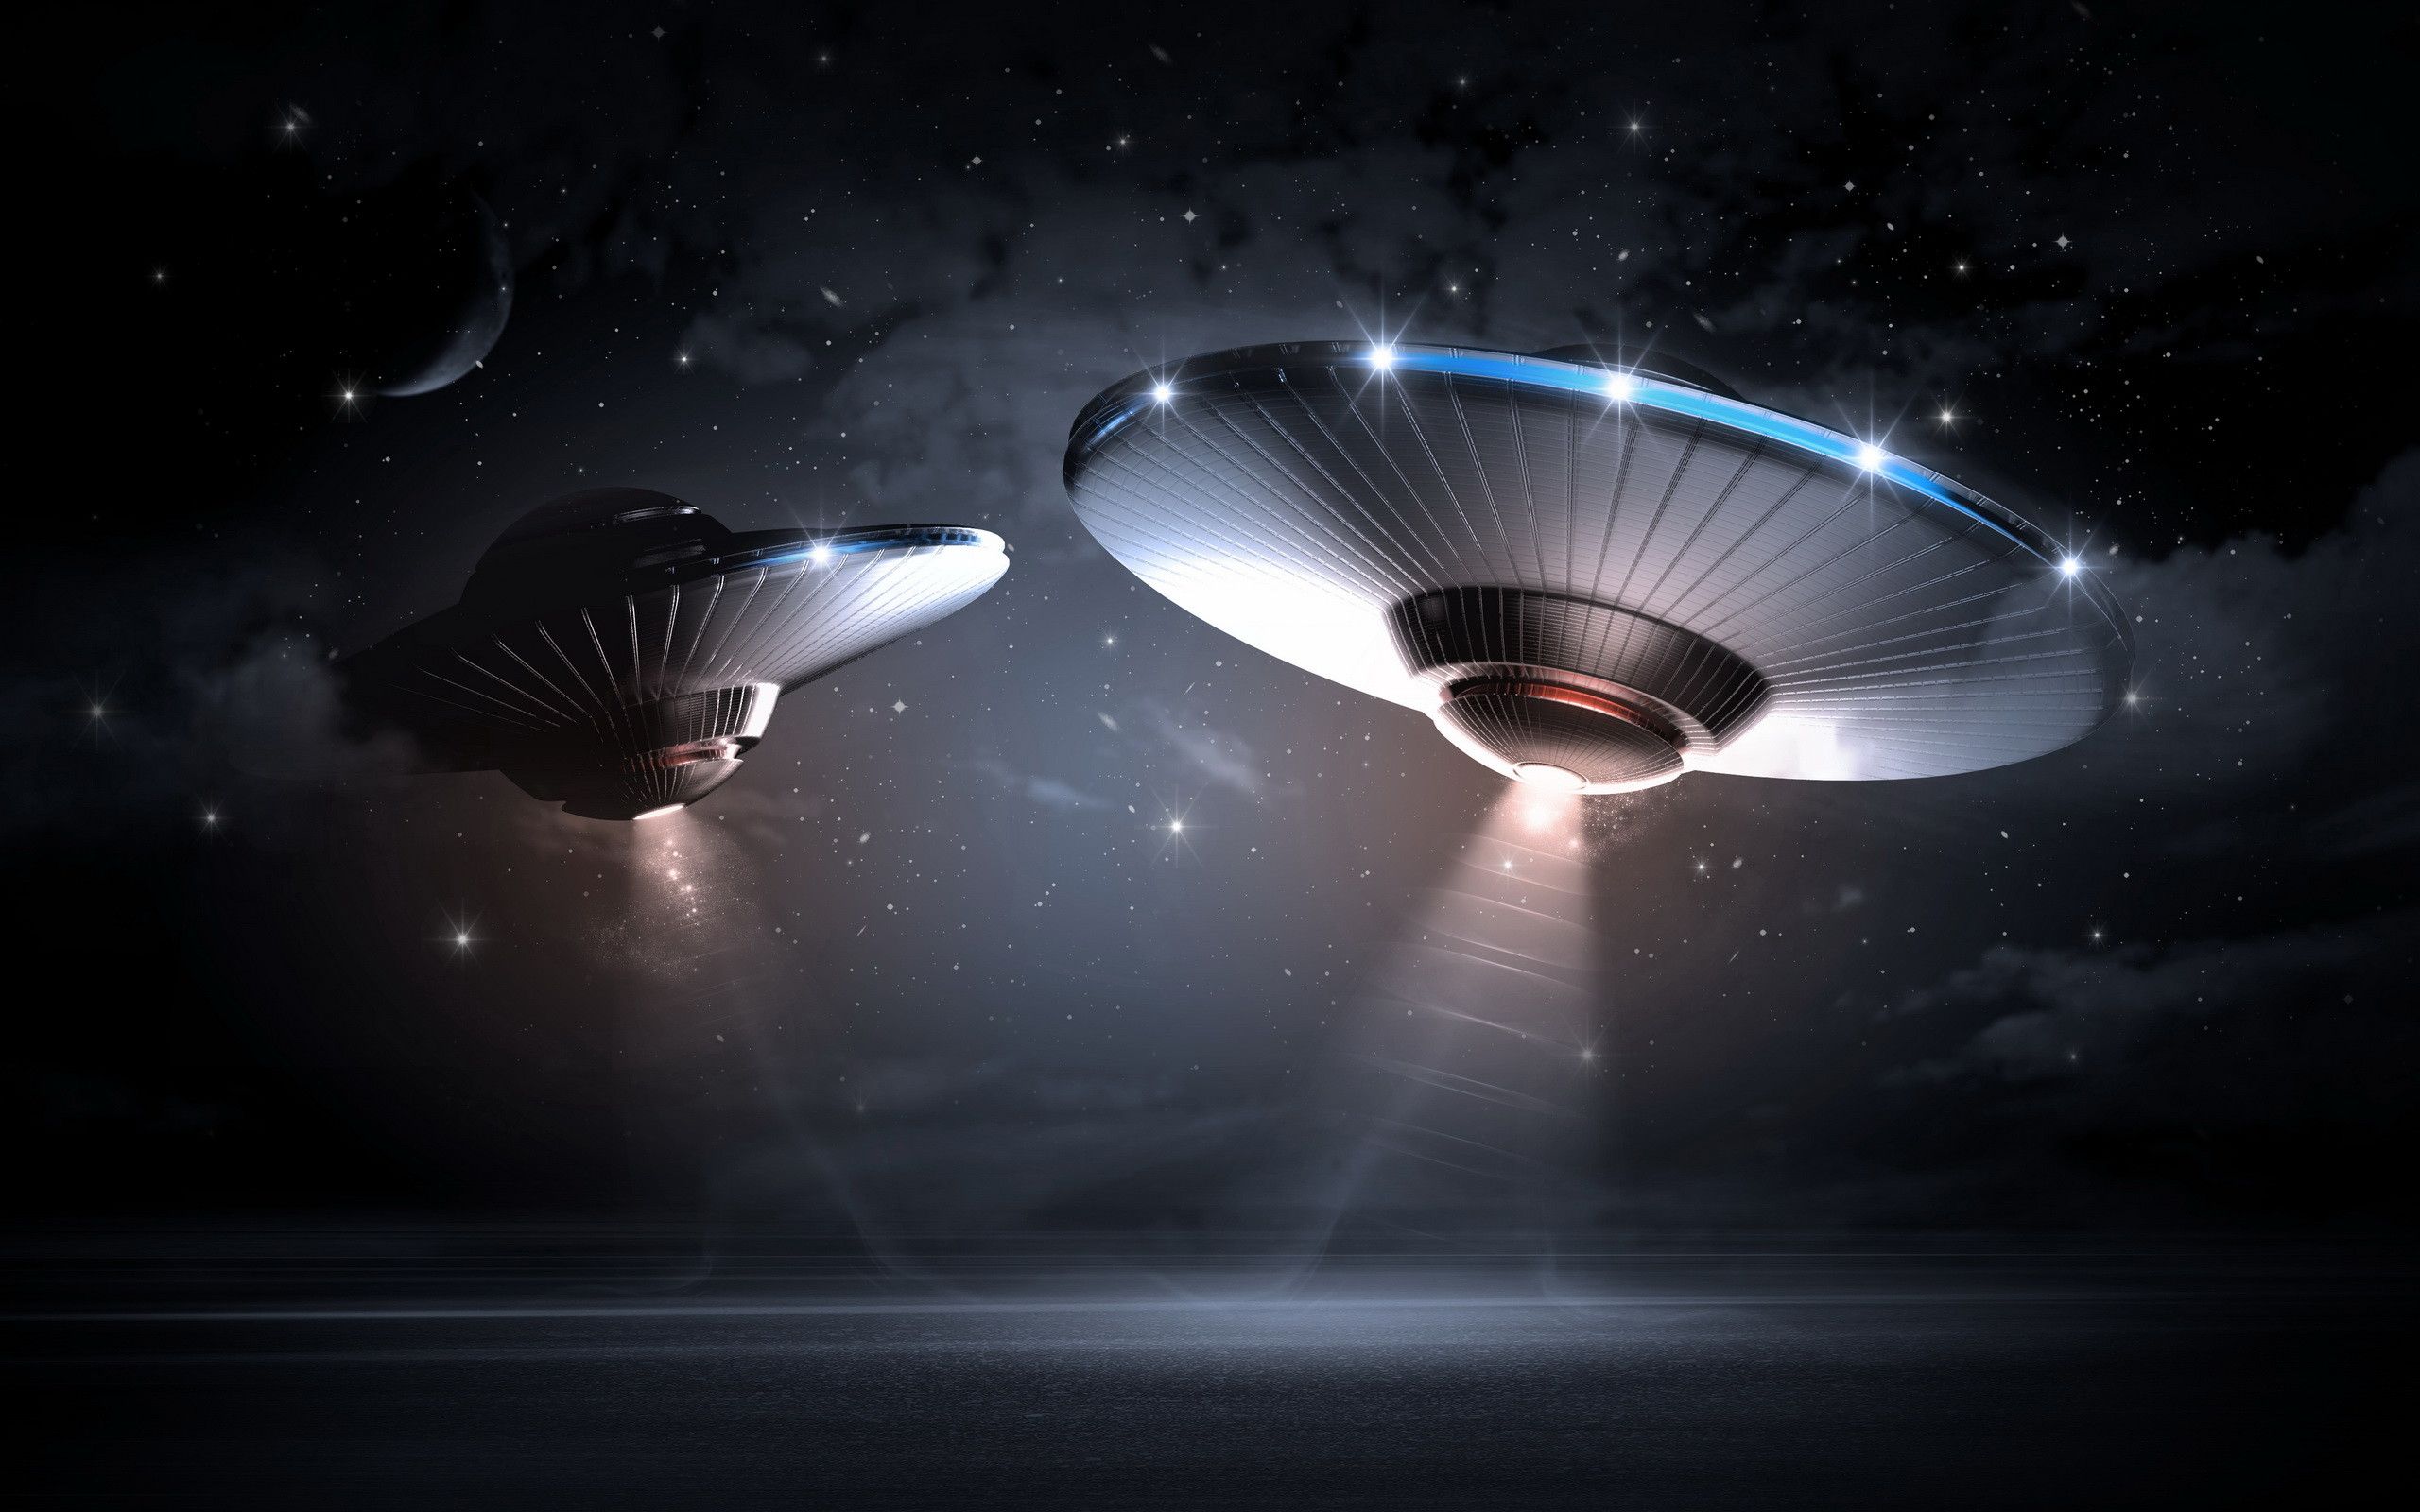 Ufo Hd Wallpapers Download.